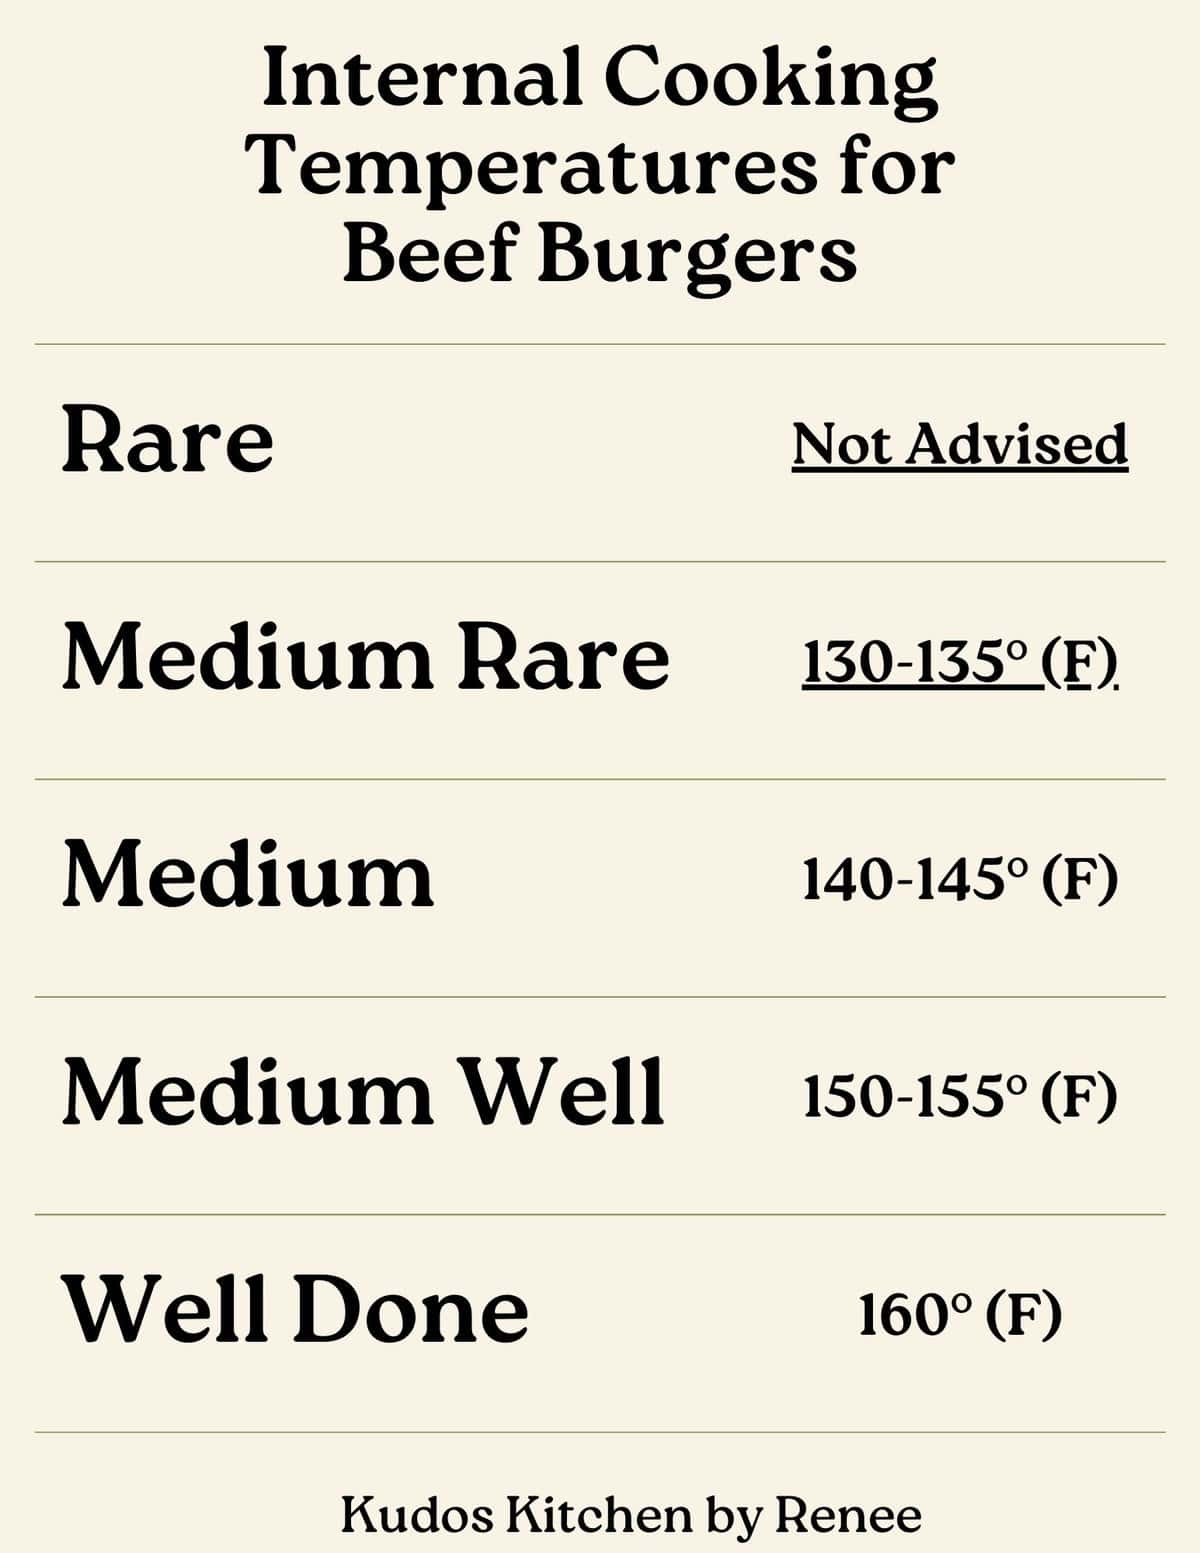 A visual guide for internal cooking temperatures for beef burgers.